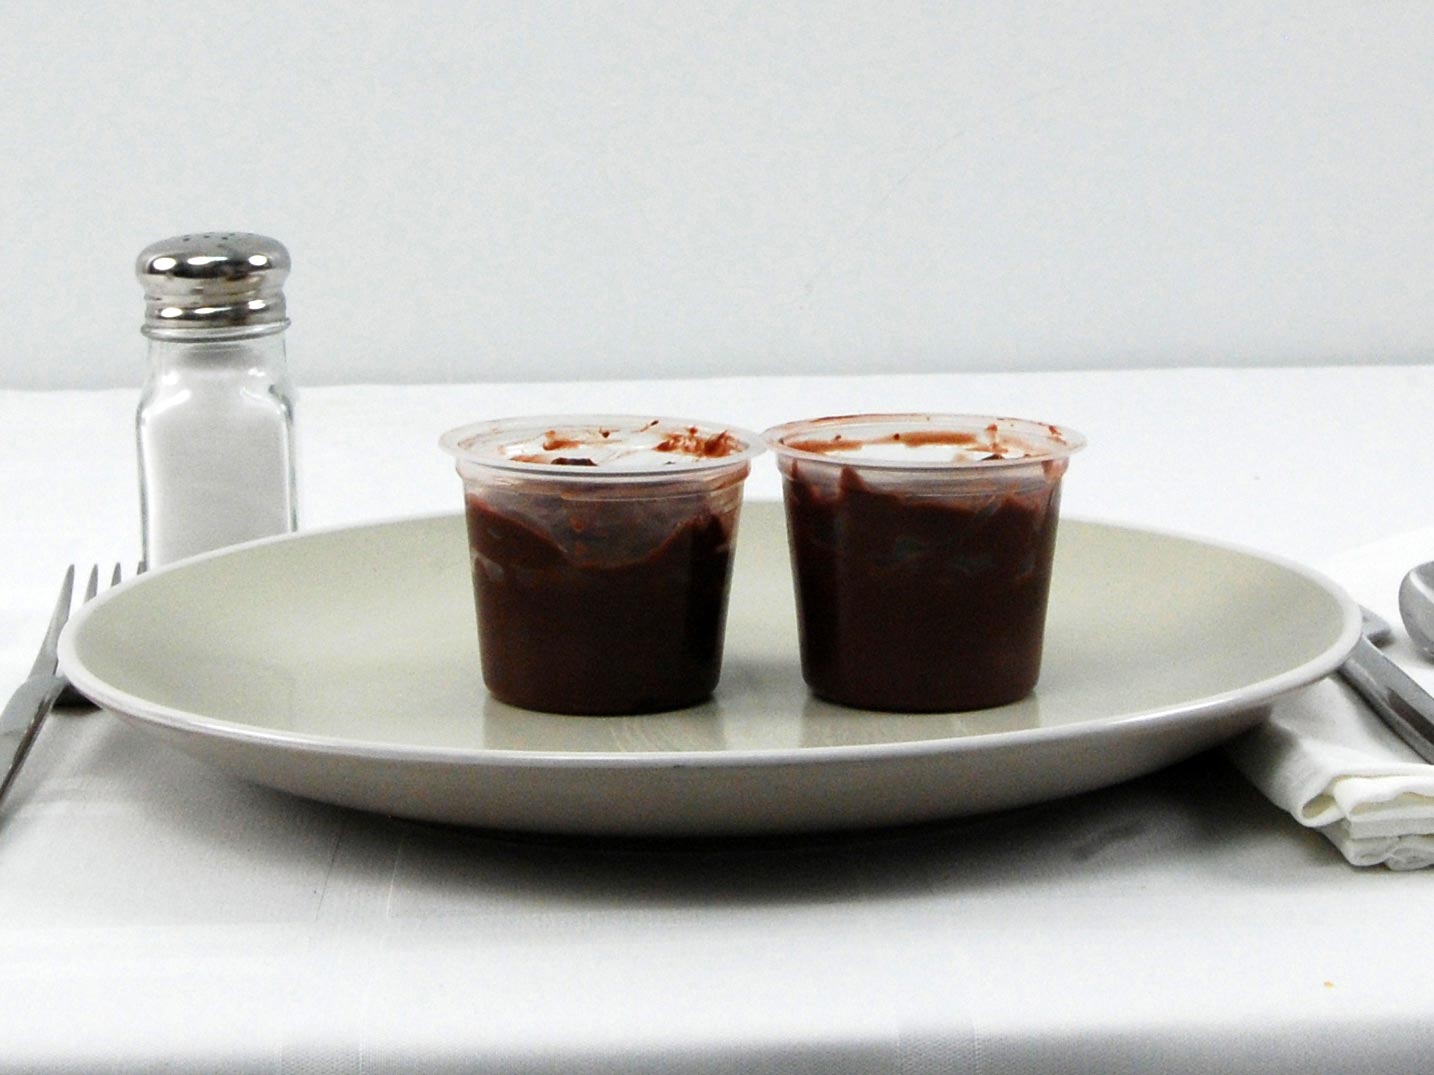 Calories in 2 container(s) of Sugar Free Chocolate Pudding Snacks